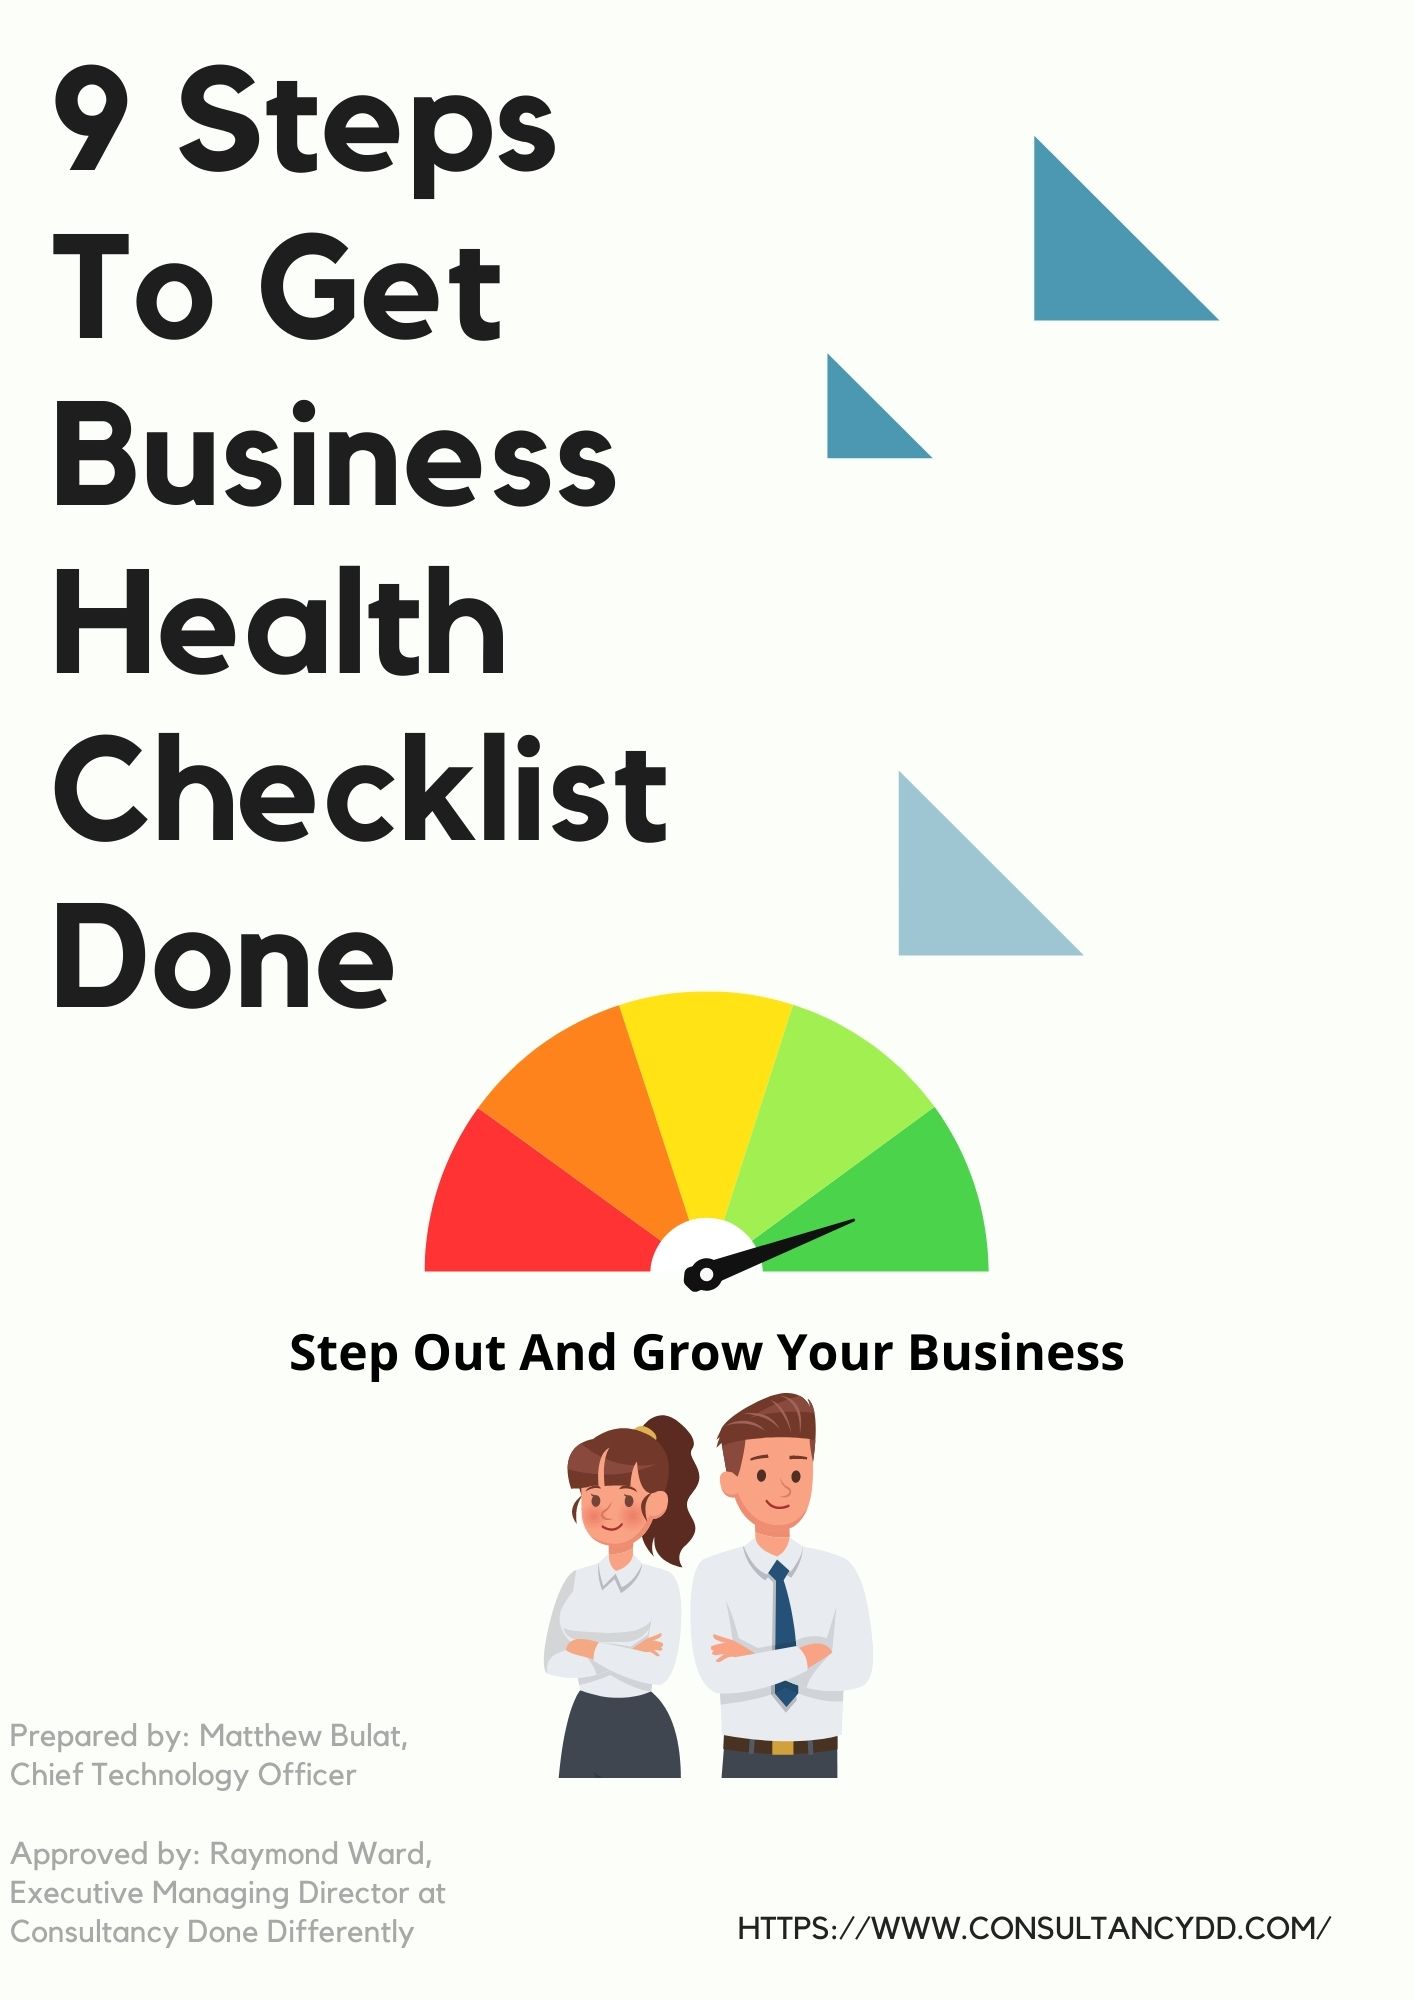 9 Steps To Get Business Health Checklist Done Page 1